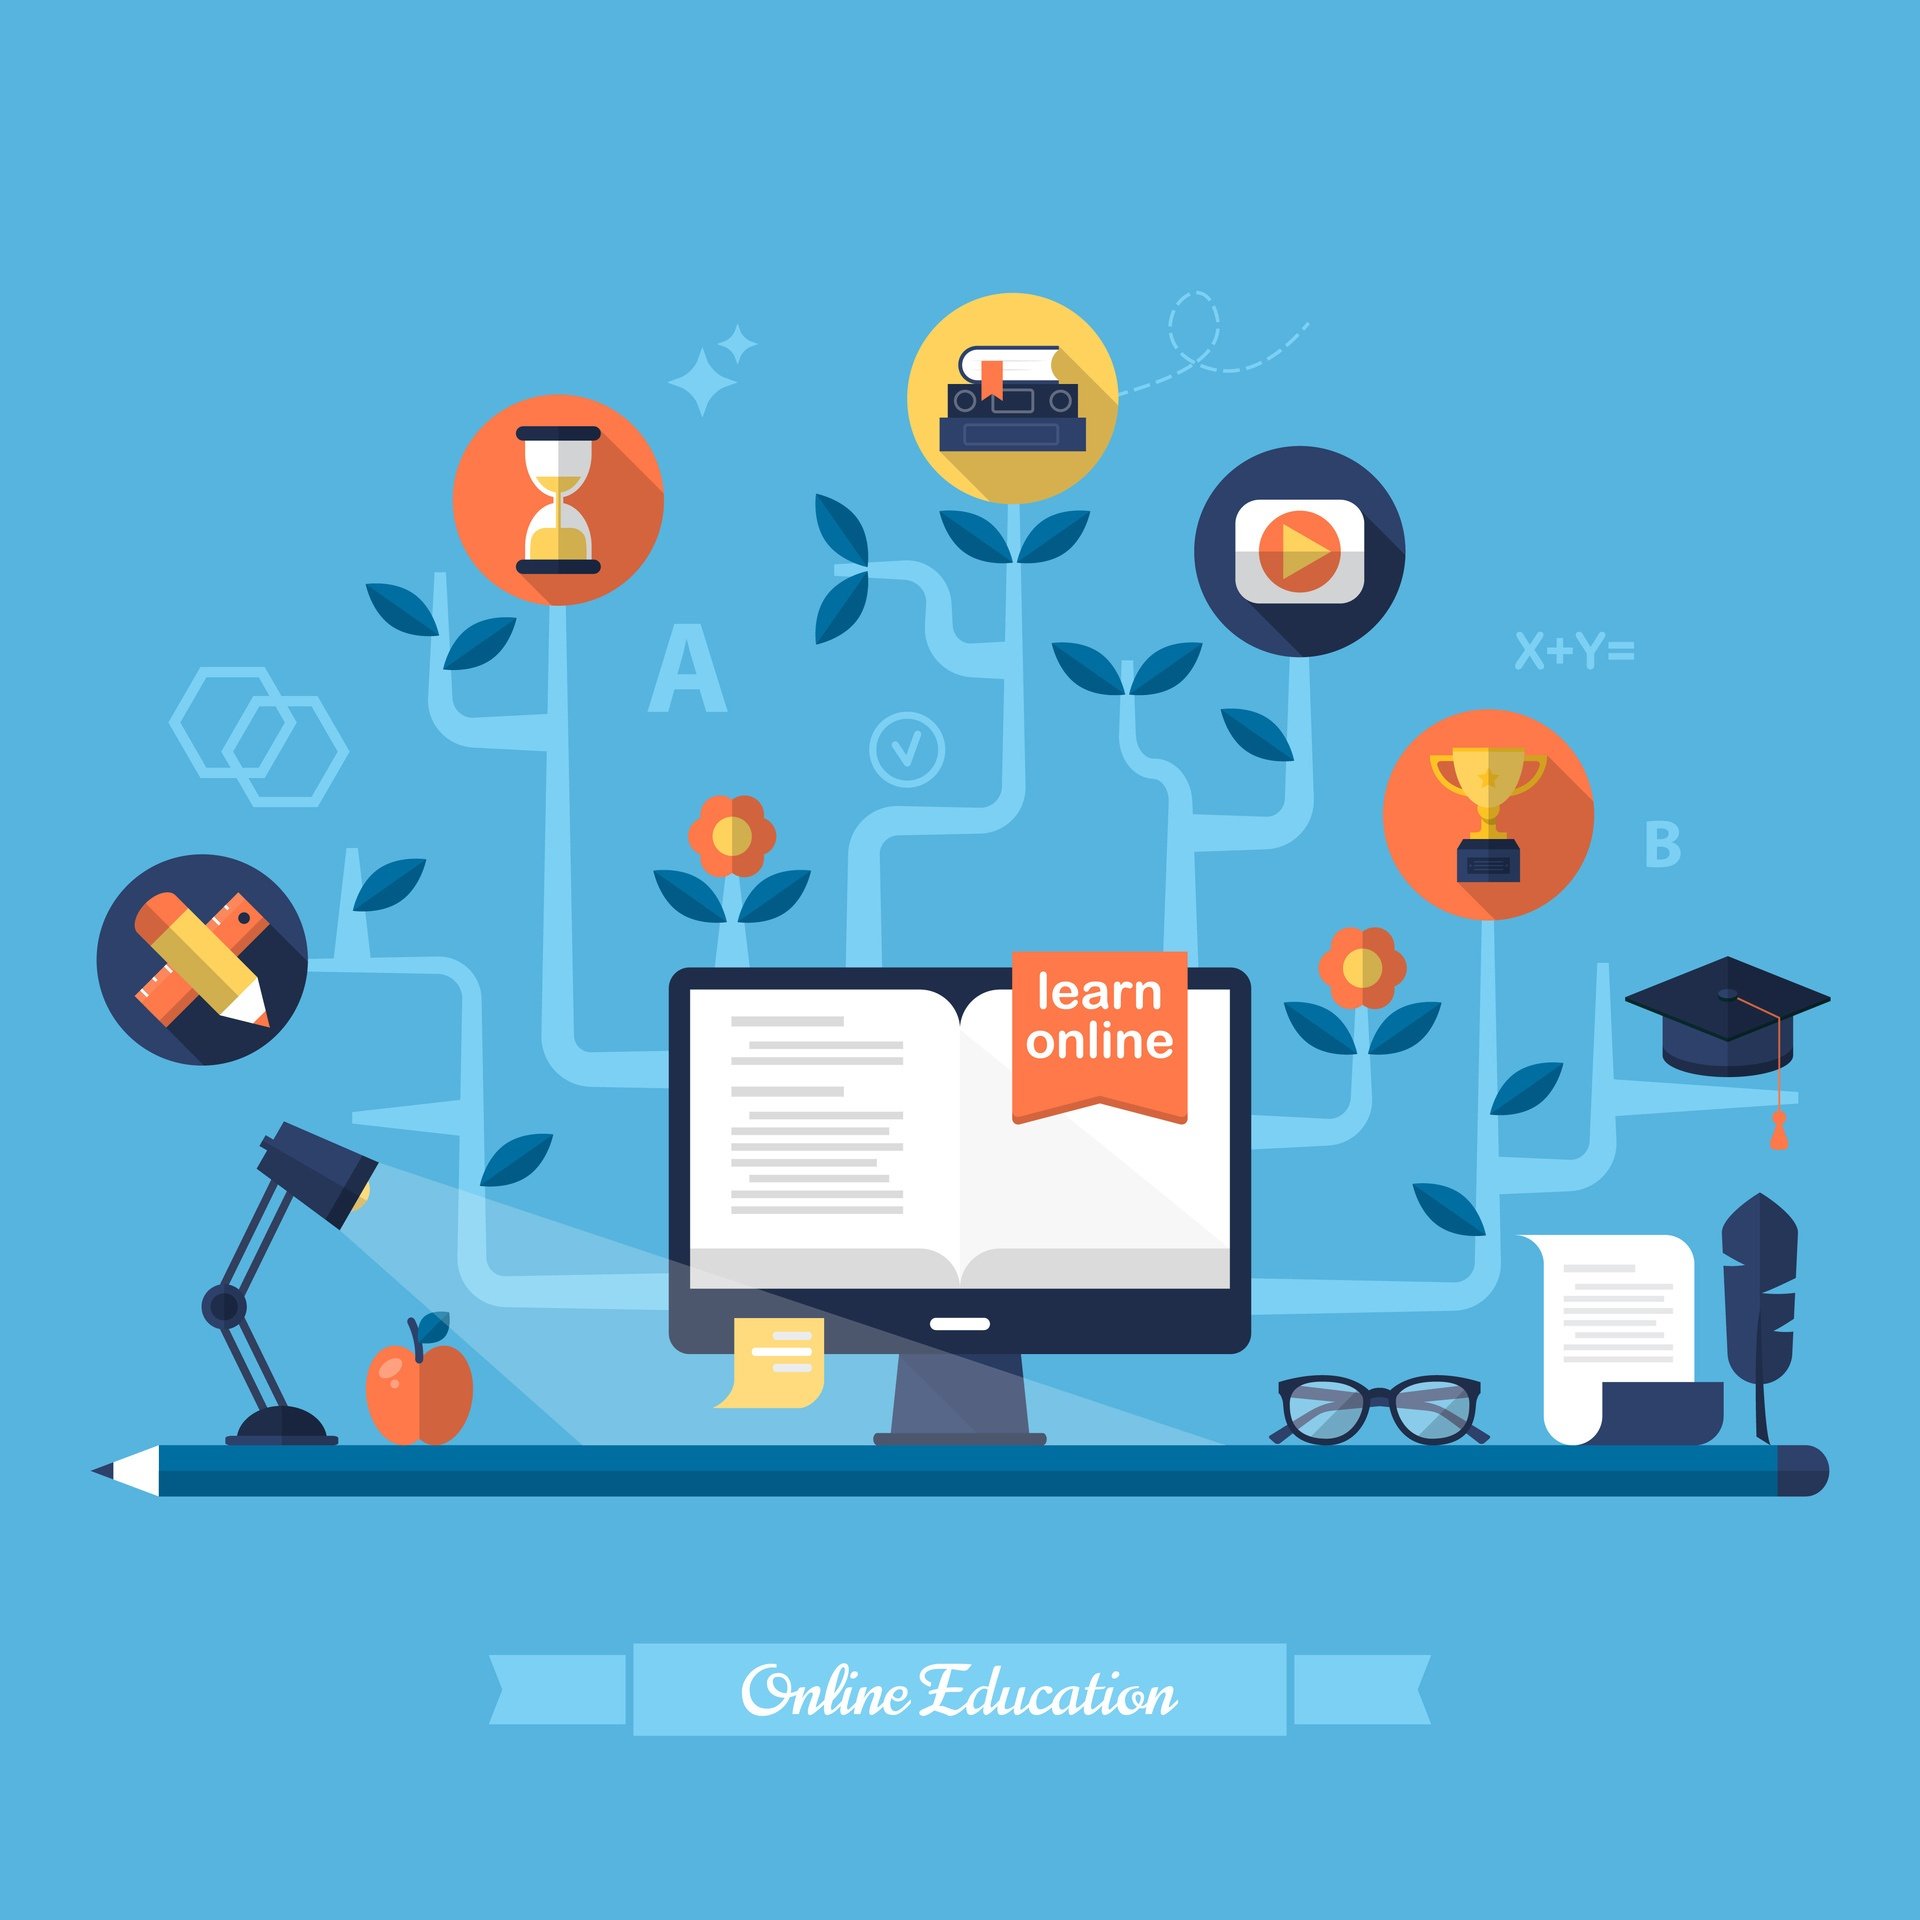 Online Learning Advantages Why Online Learning Offers Plenty Of Incentives Elearning Industry